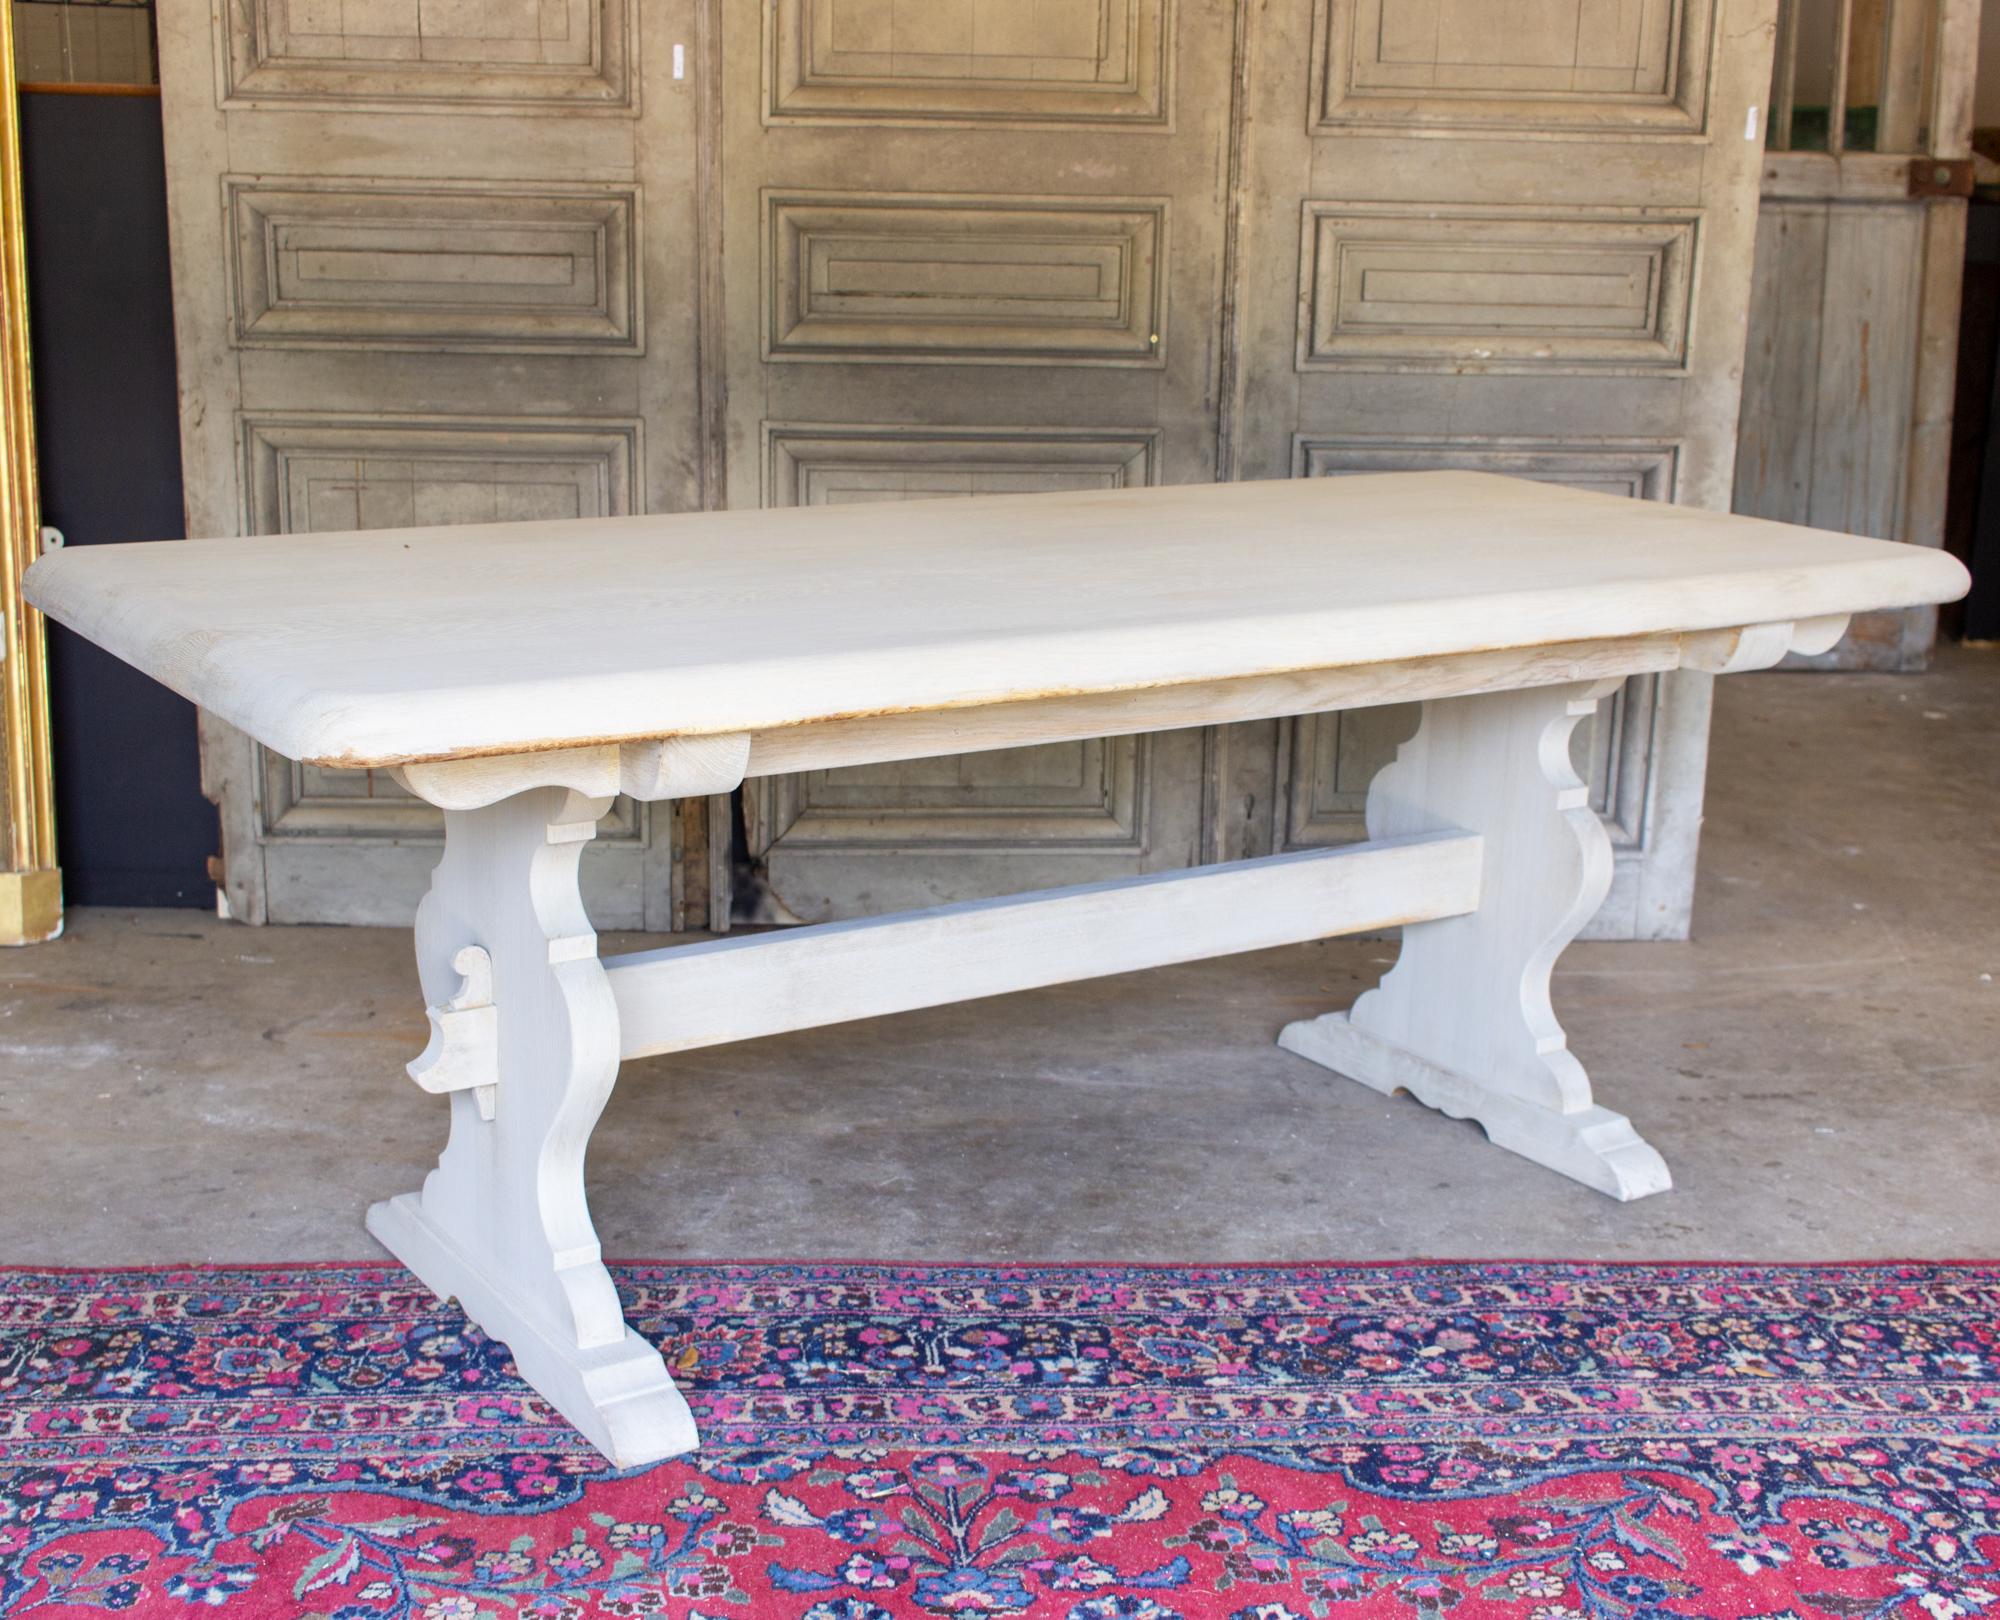 This is a beautiful, antique French oak trestle-style dining table with a light greige wash finish. The table is perfect for casual dining, or perhaps in a covered, outdoor space for entertaining. Measuring just over 6.5-feet long, it will easily